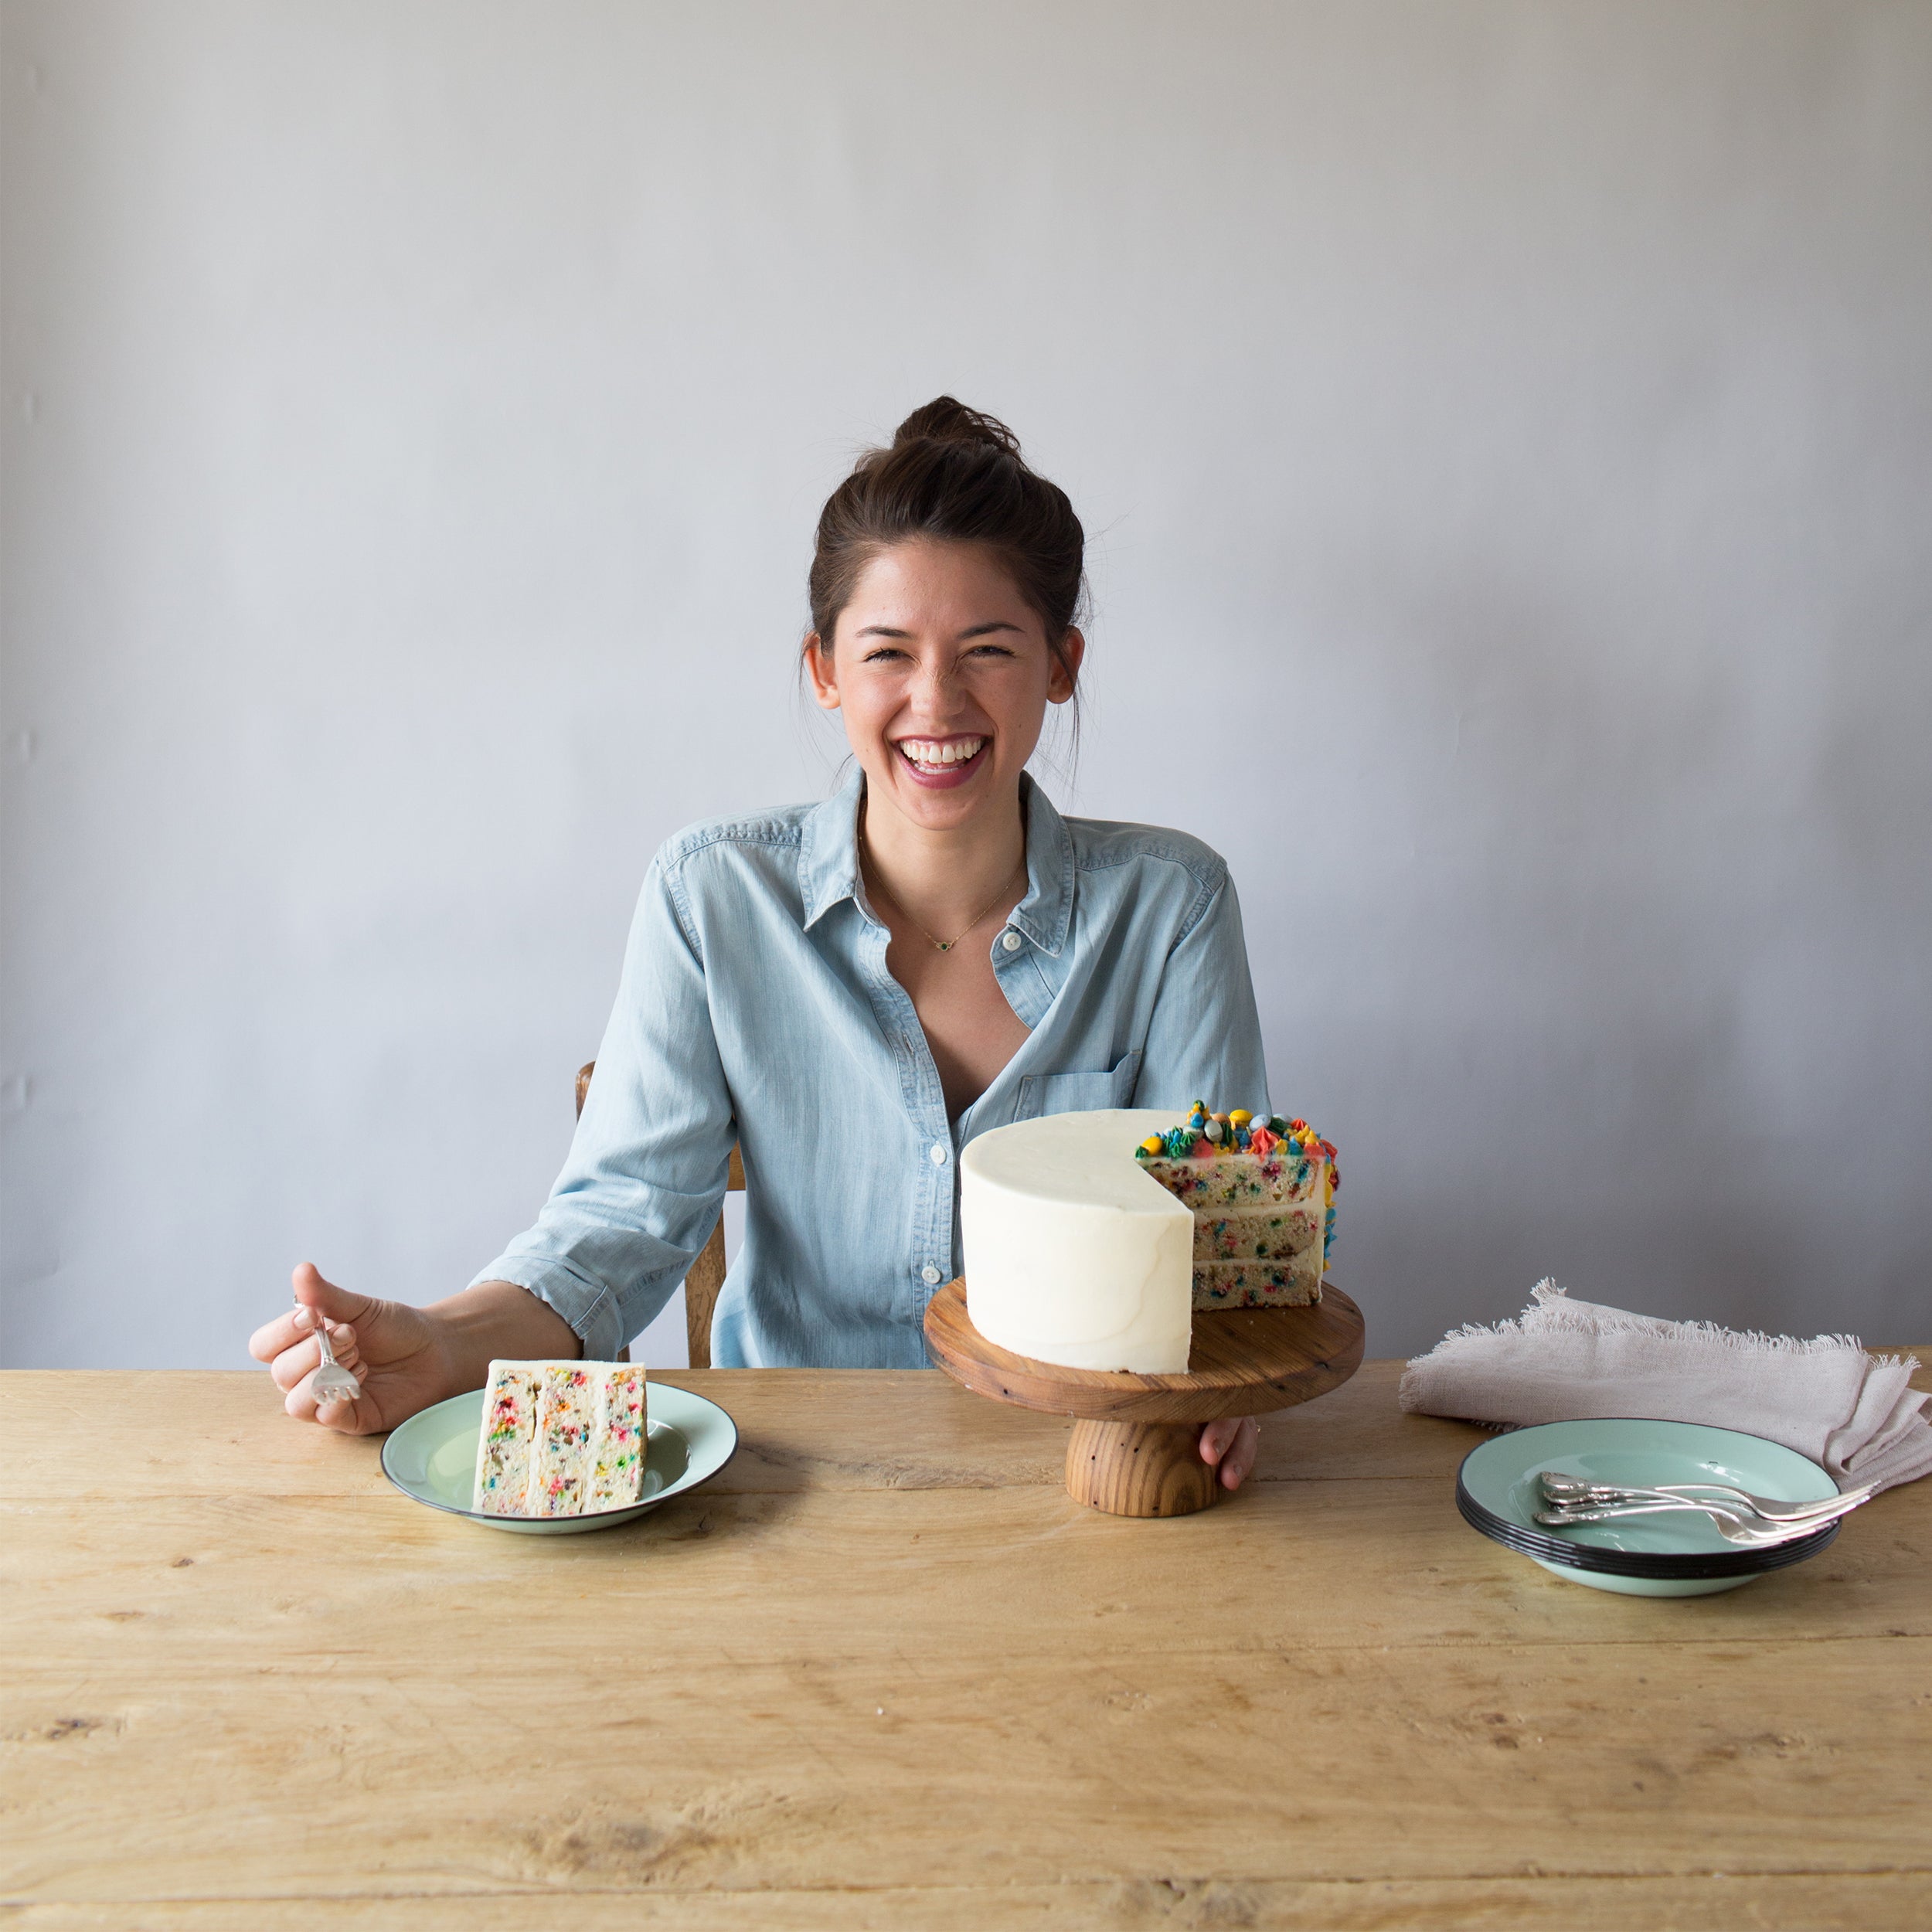 You Can’t Help But Love Molly Yeh